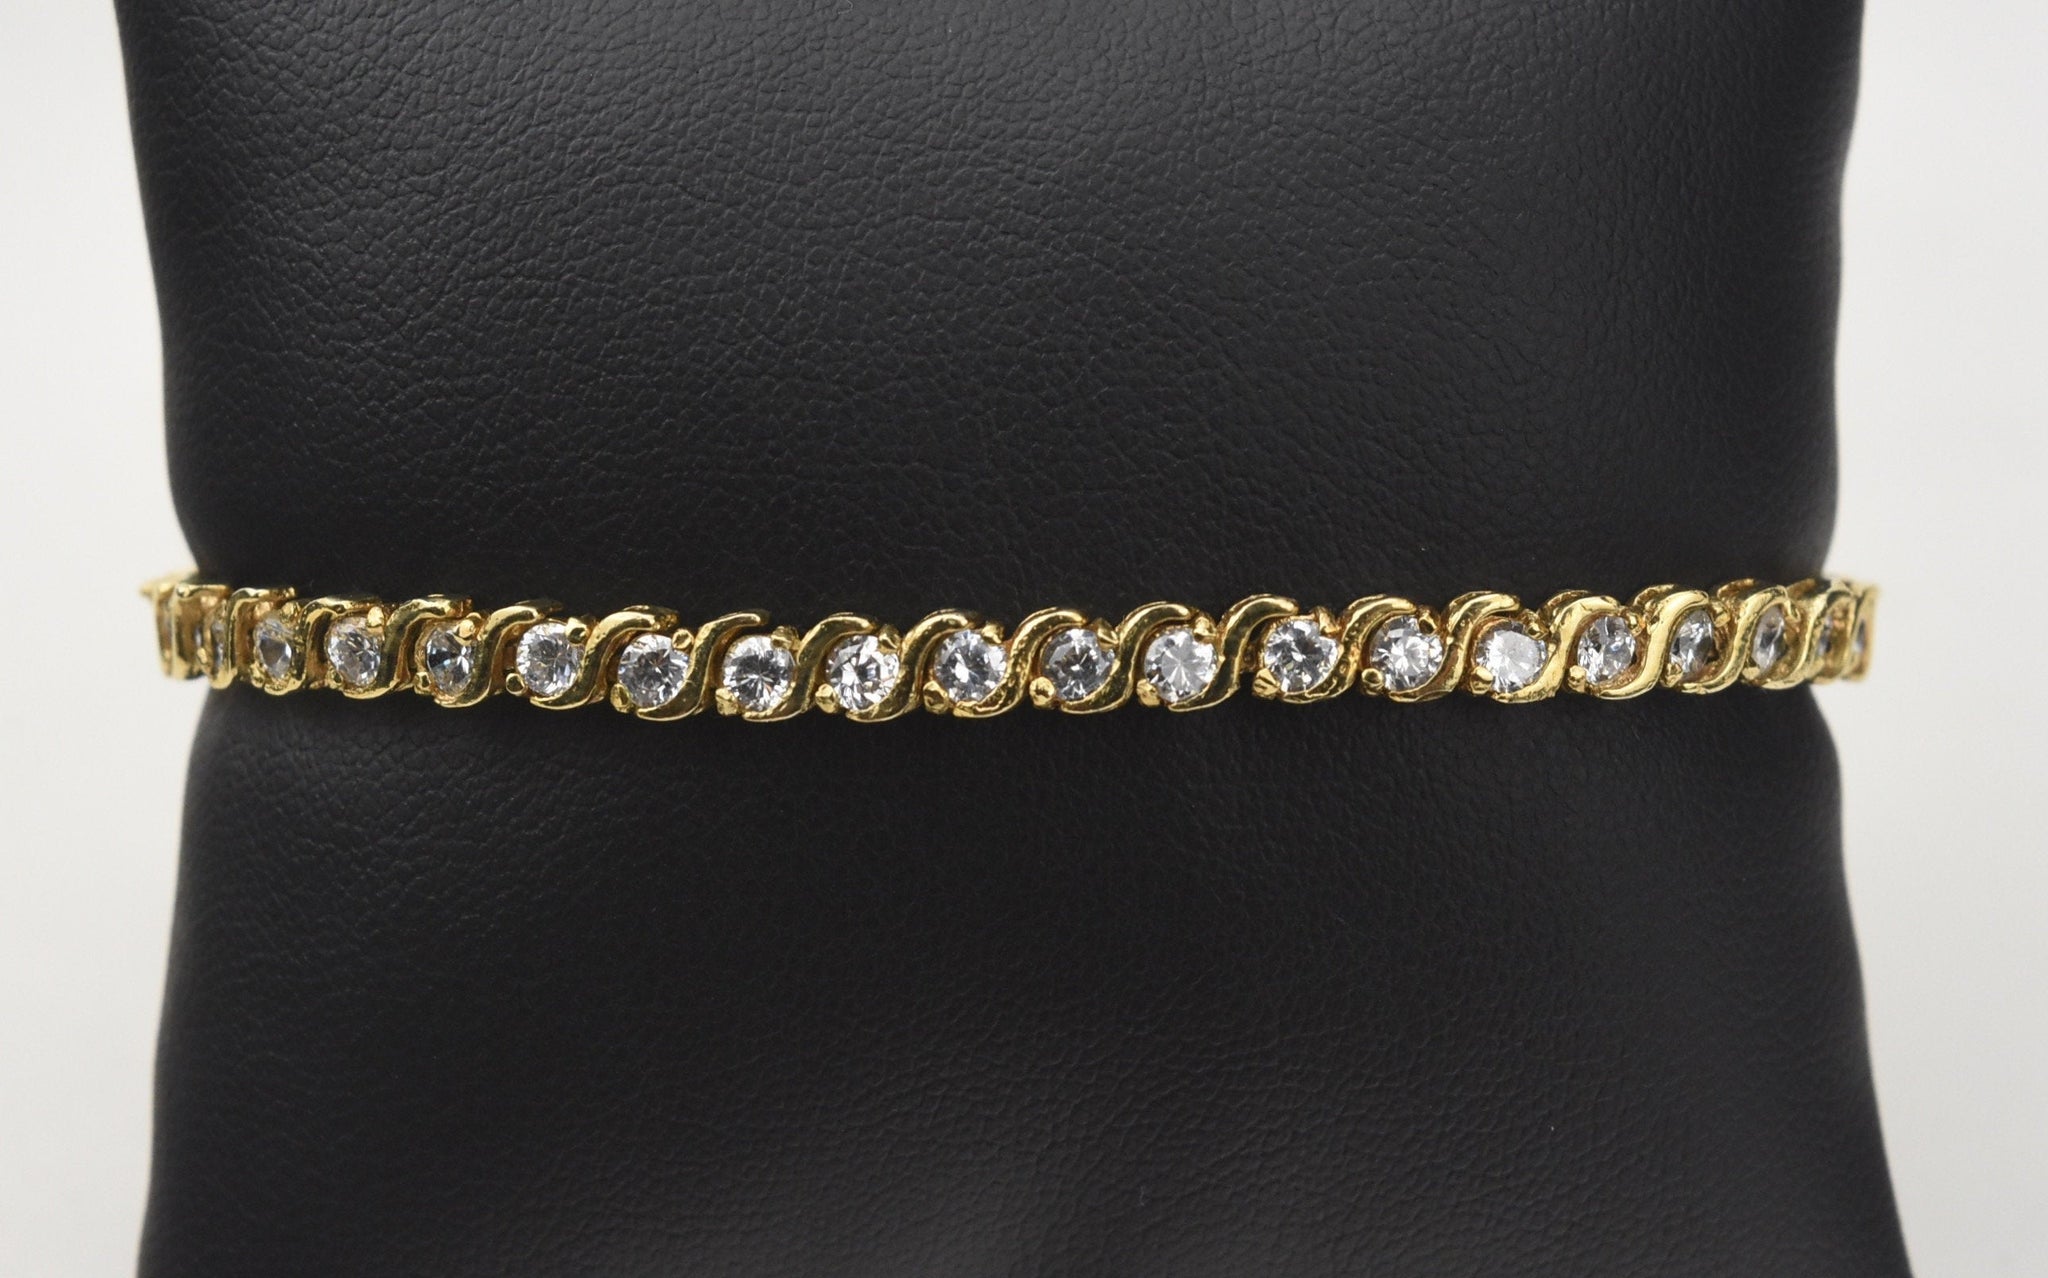 Sterling Silver Gold Tone Tennis Bracelet with Cubic Zirconia - 7.5"